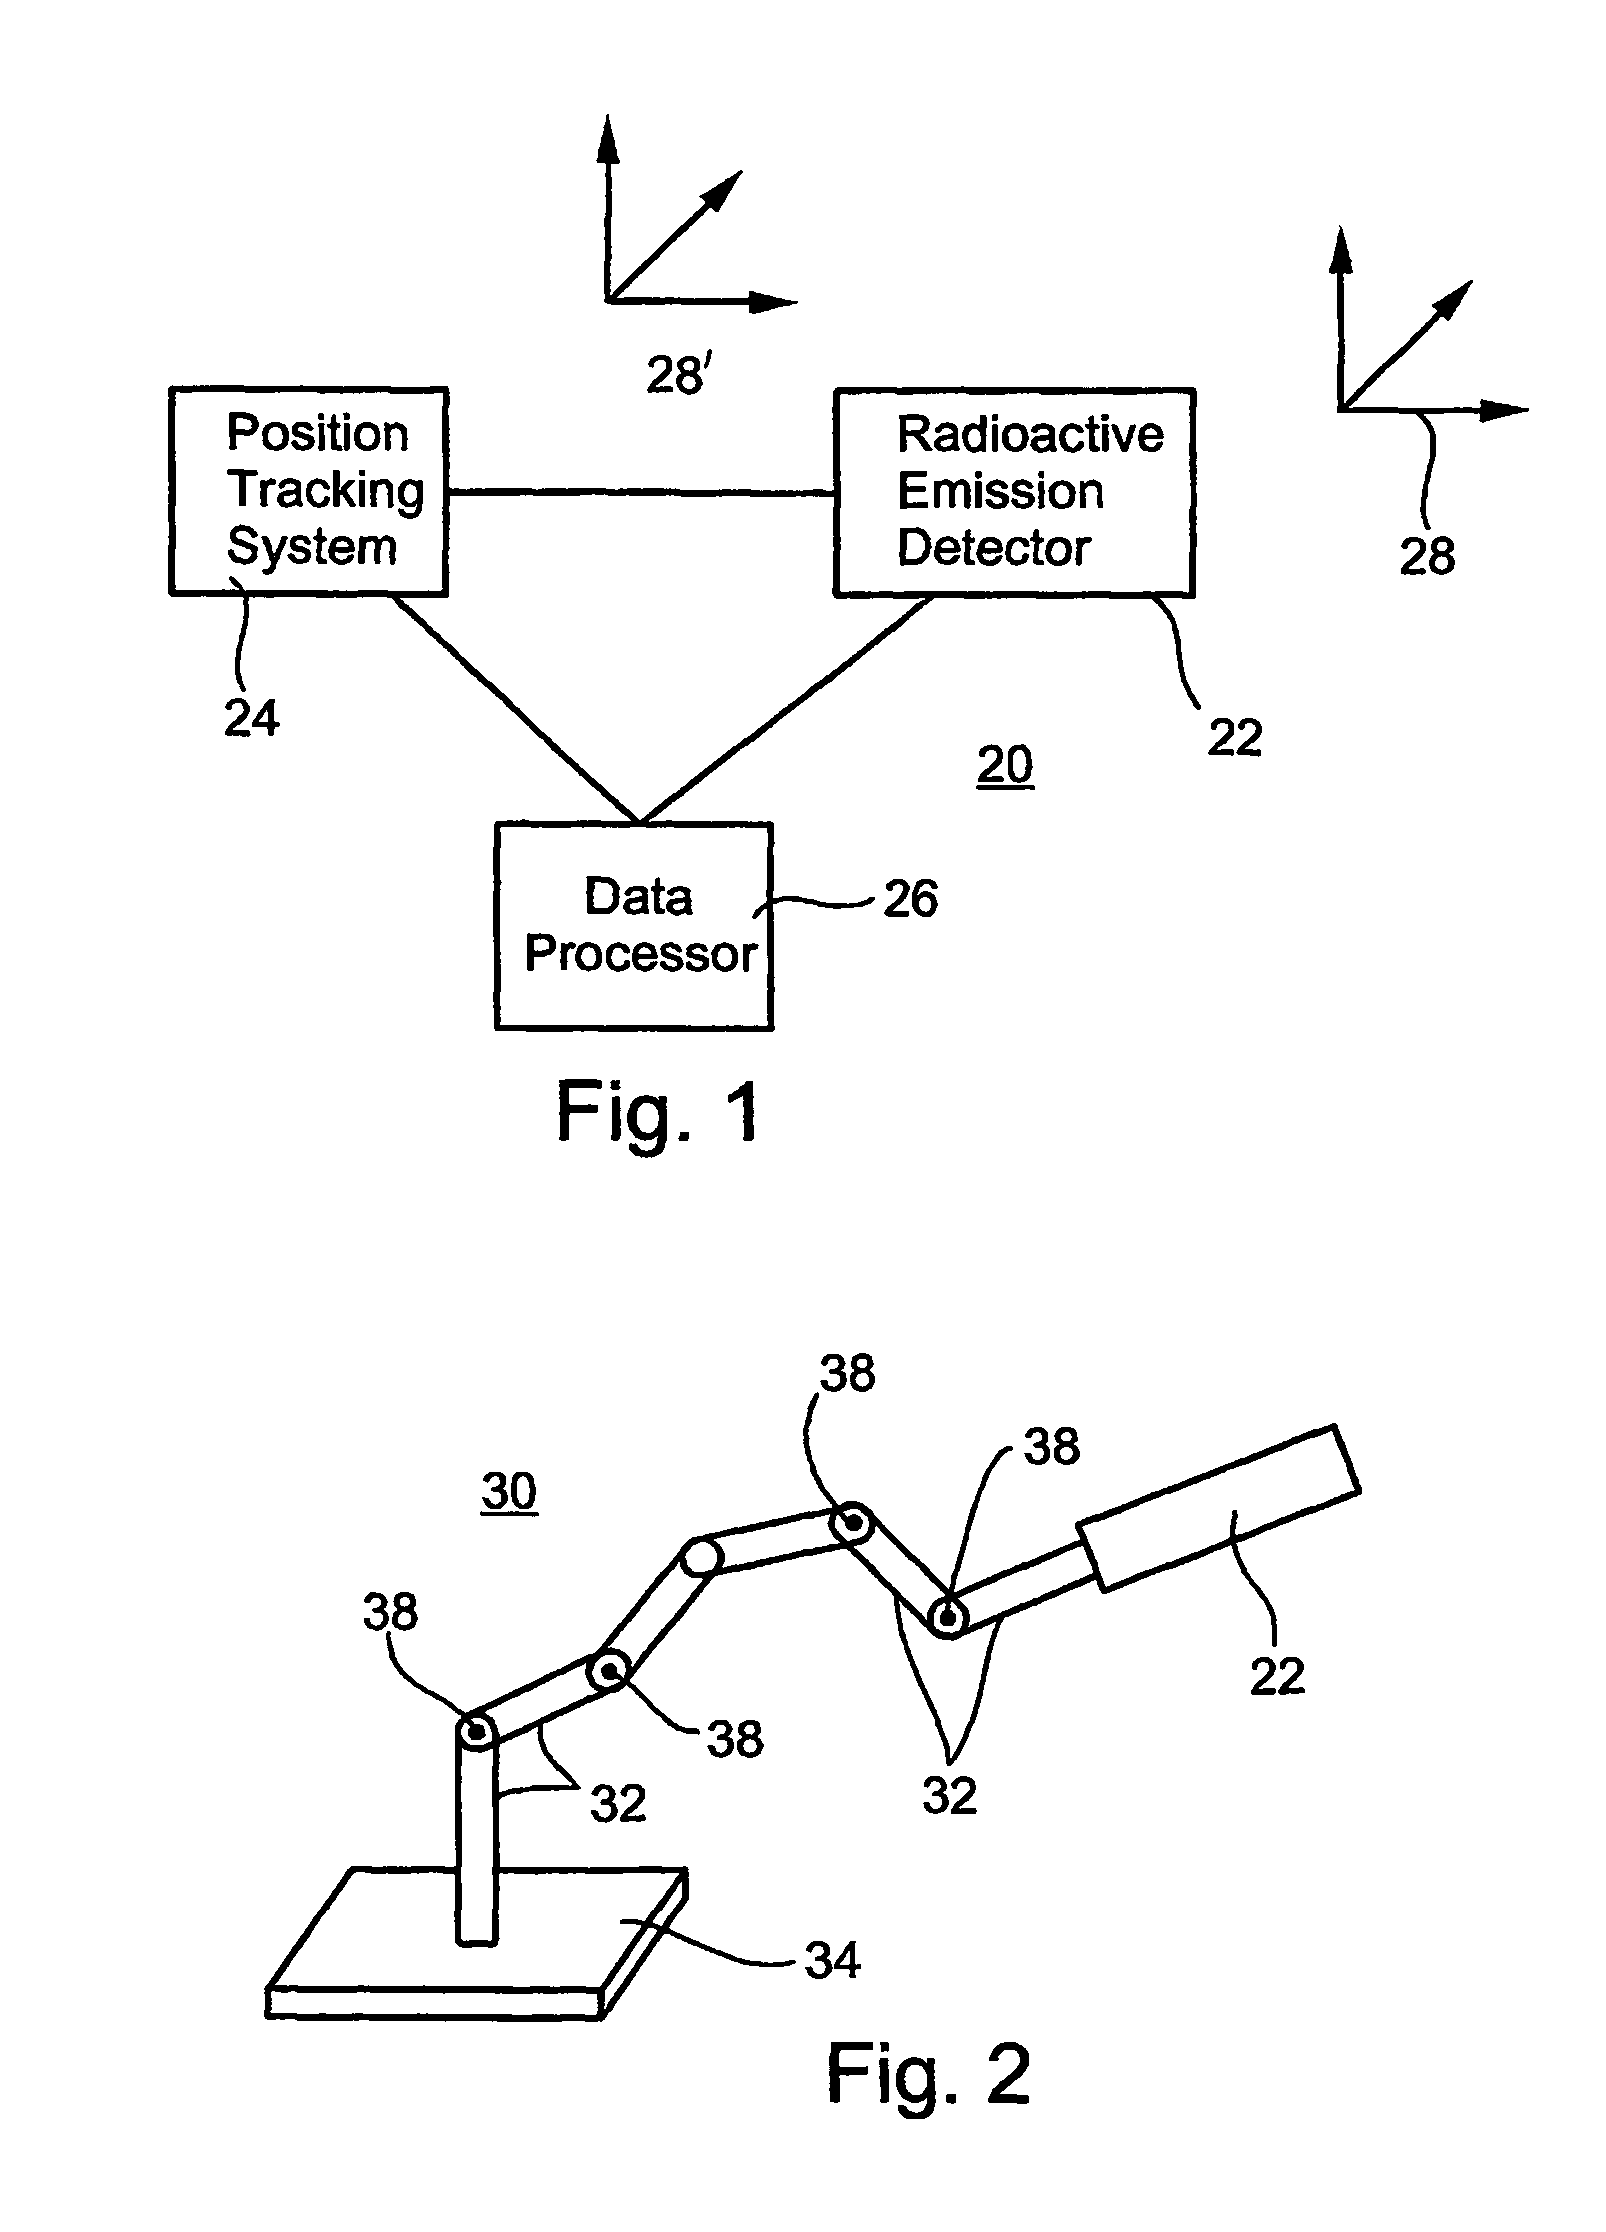 Radioactive emission detector equipped with a position tracking system and utilization thereof with medical systems and in medical procedures